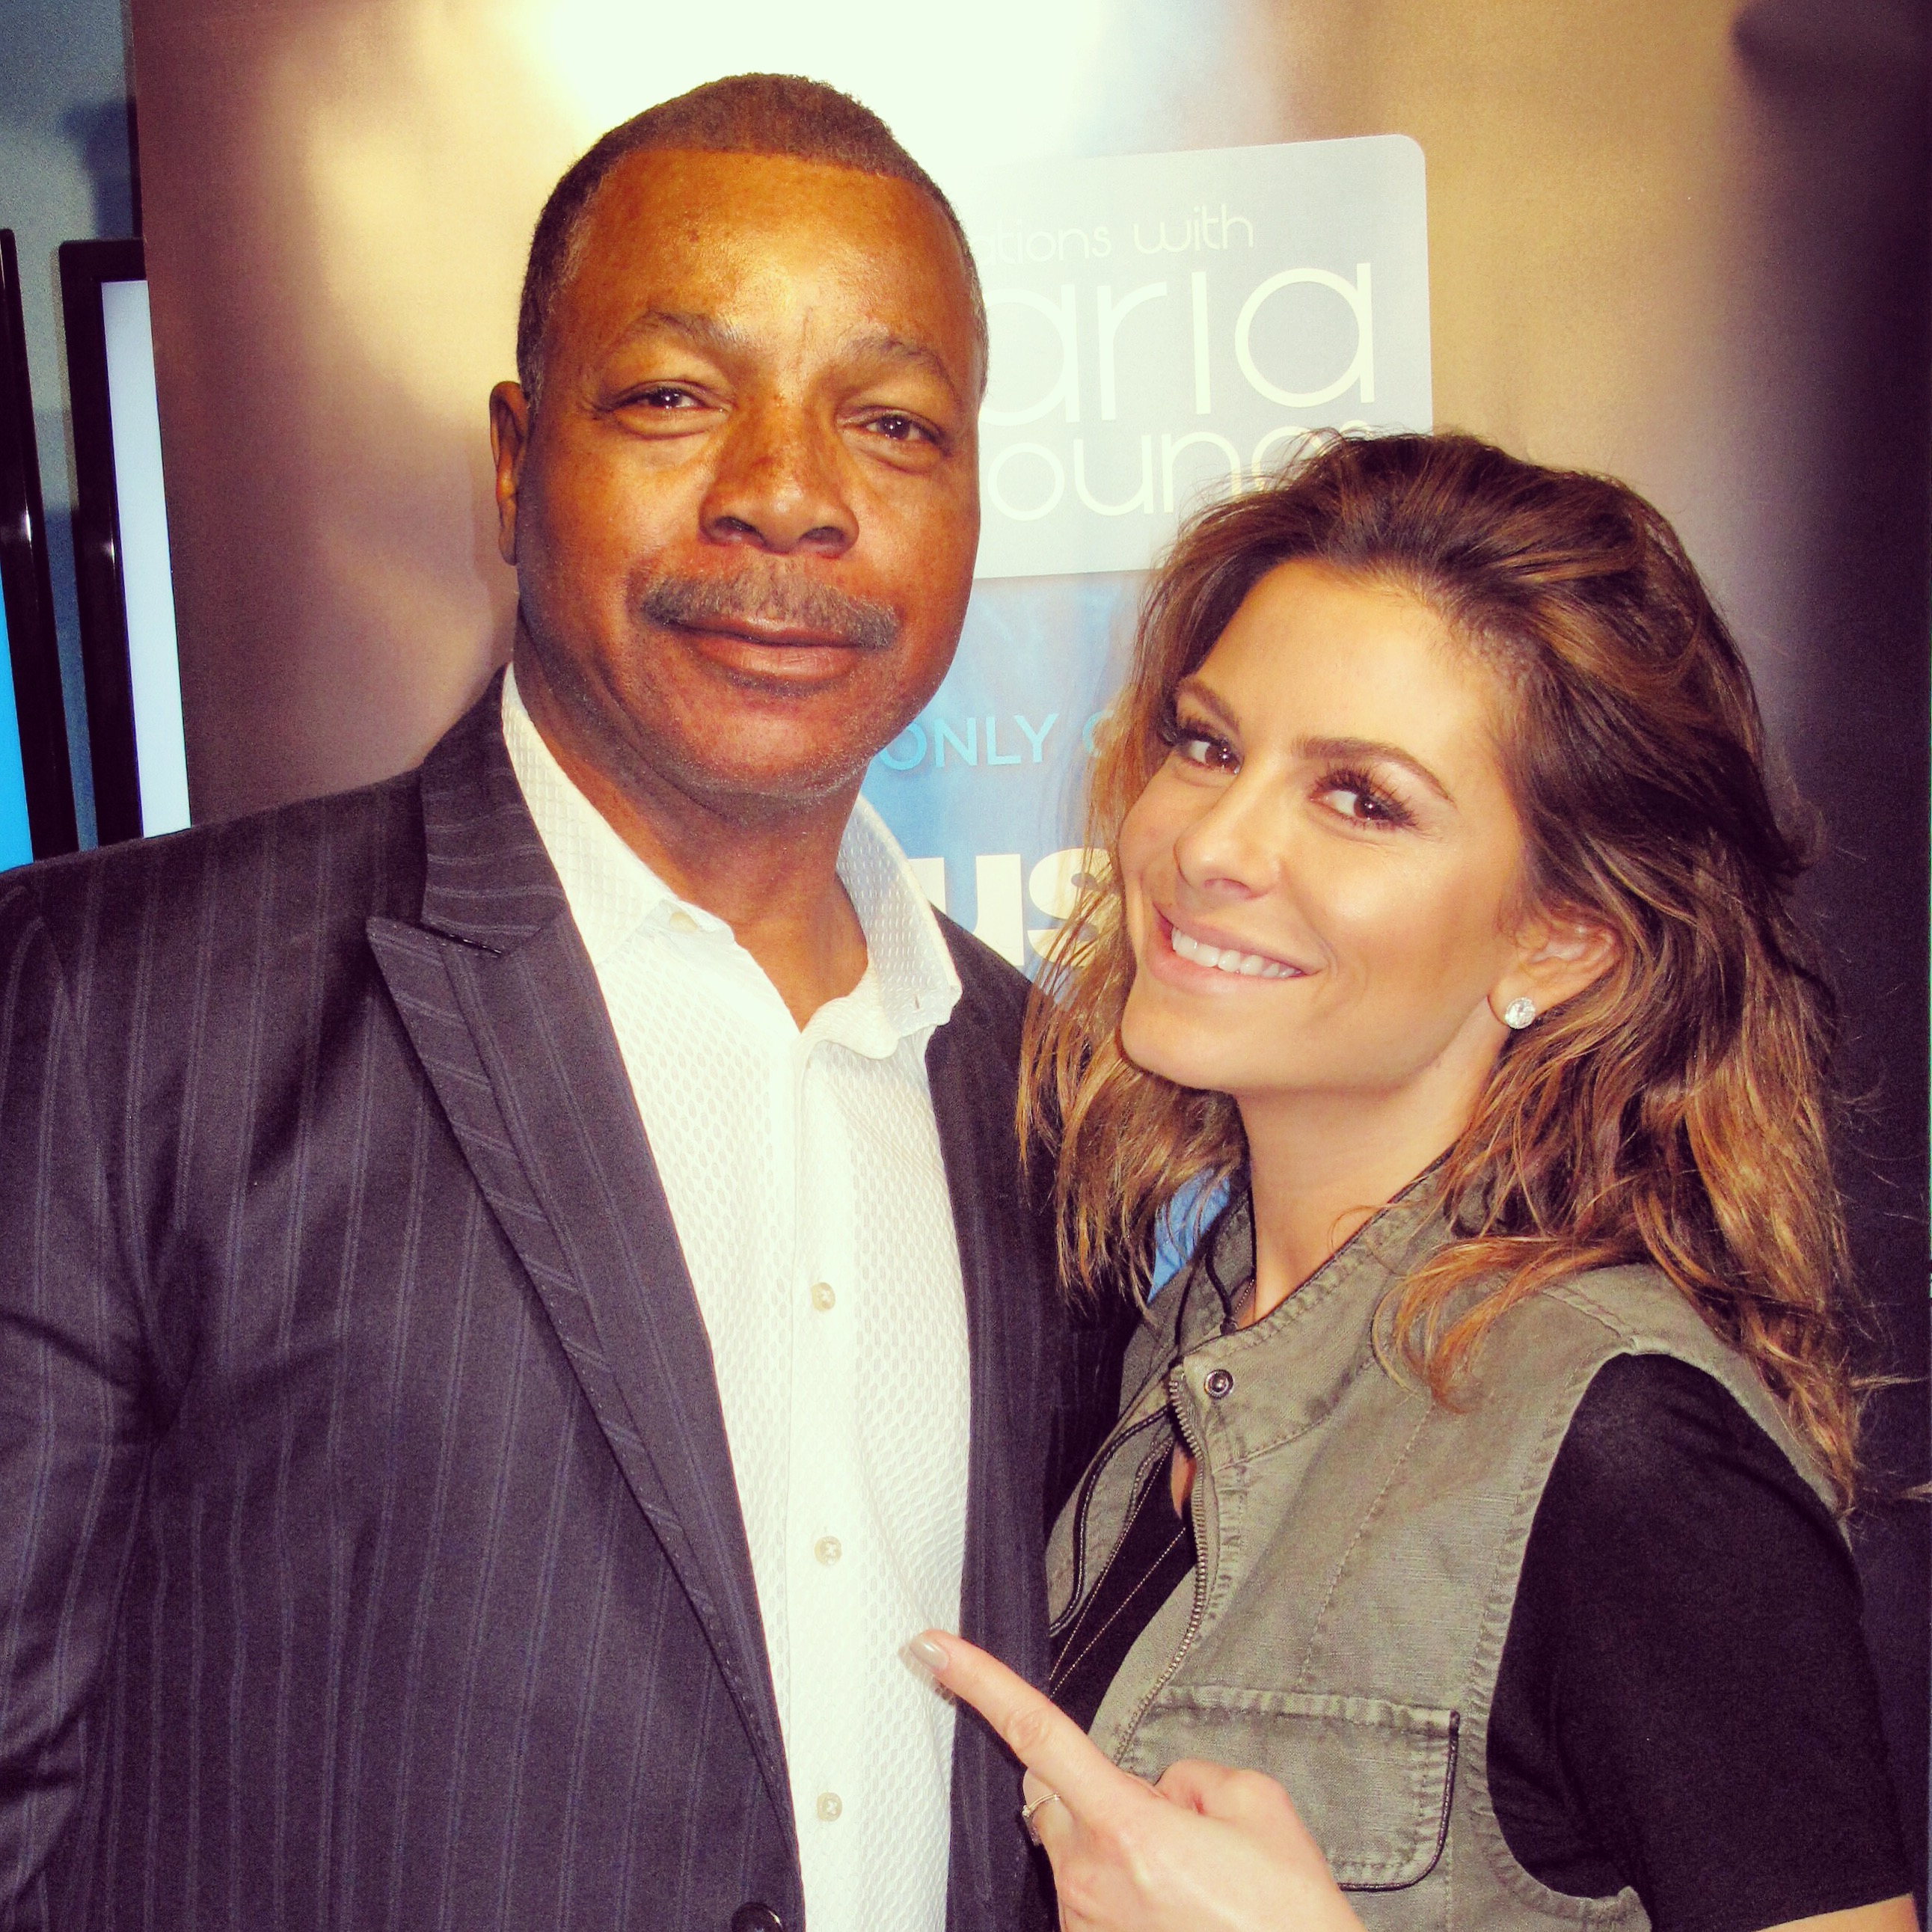 Carl_Weathers_02_11_2016 - Conversations with Maria Menounos